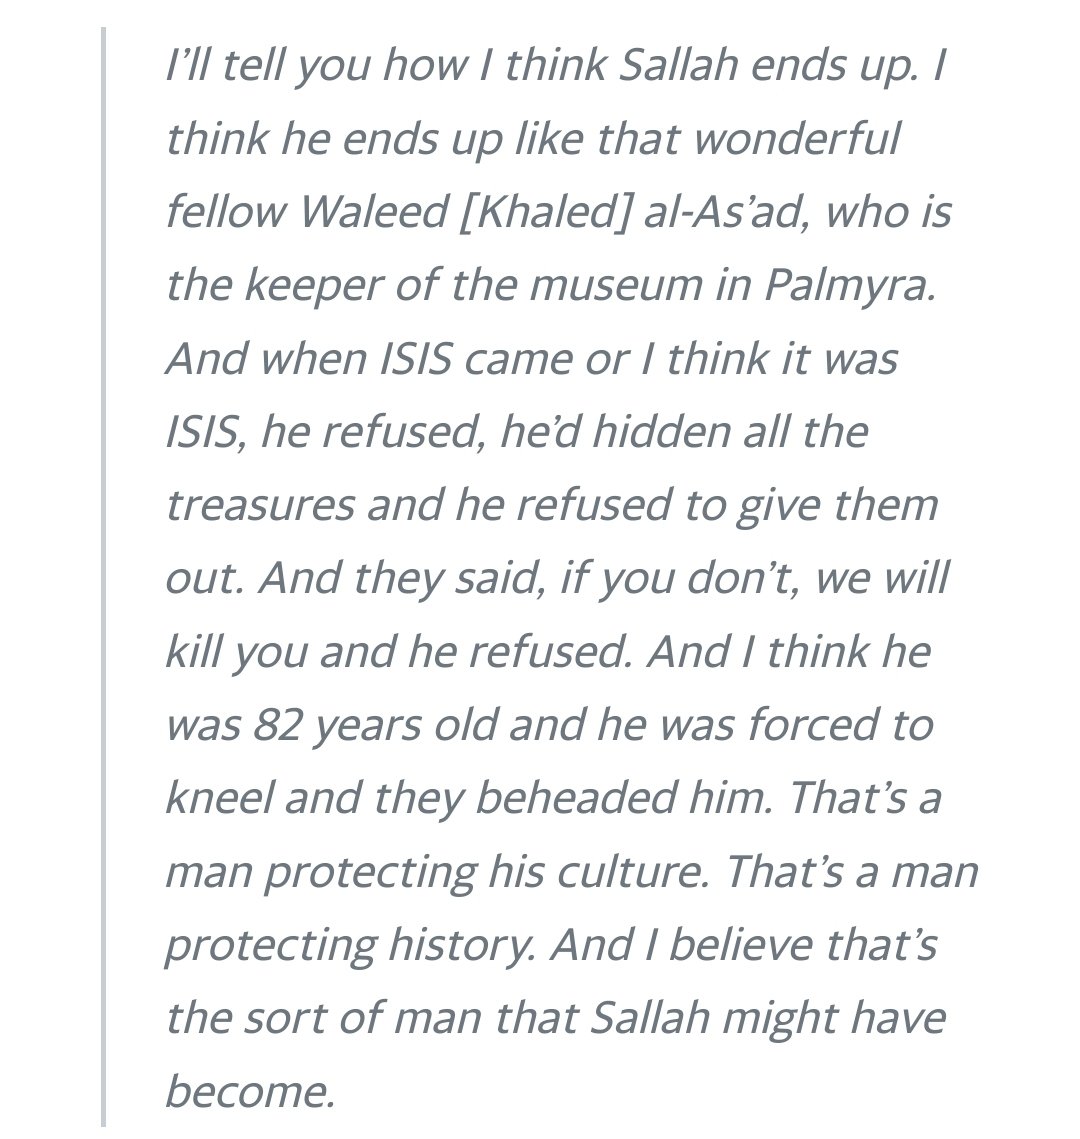 John Rhys-Davies imagines that Sallah's ultimate fate was to be beheaded by ISIS. I'm actually surprised Kathleen didn't put that in Indy5. #missedopportunity